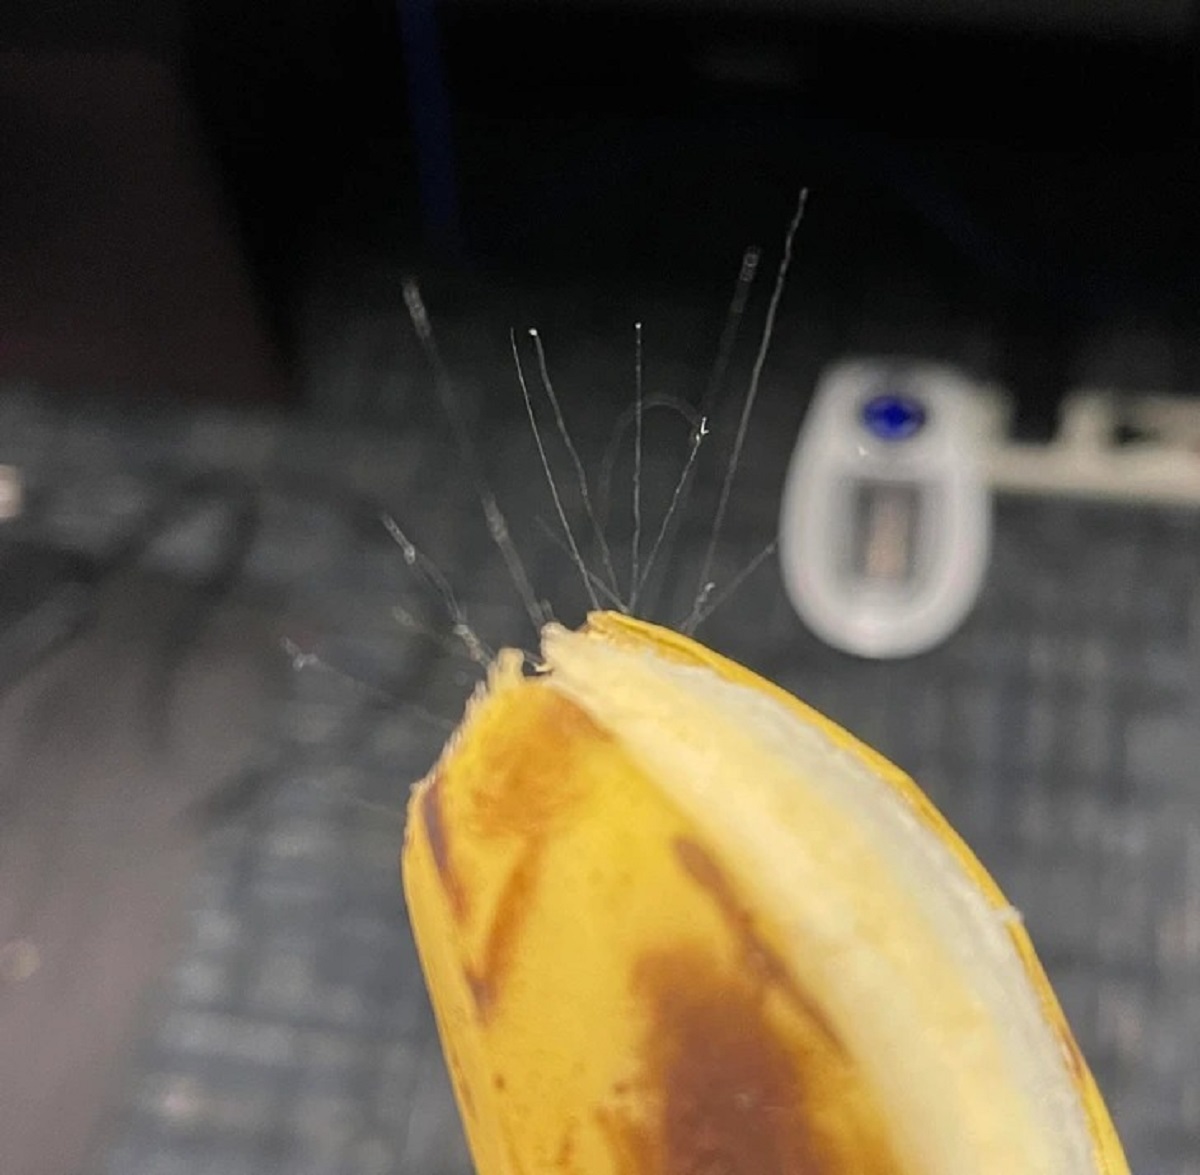 Some “hair” protruding from a just-peeled banana